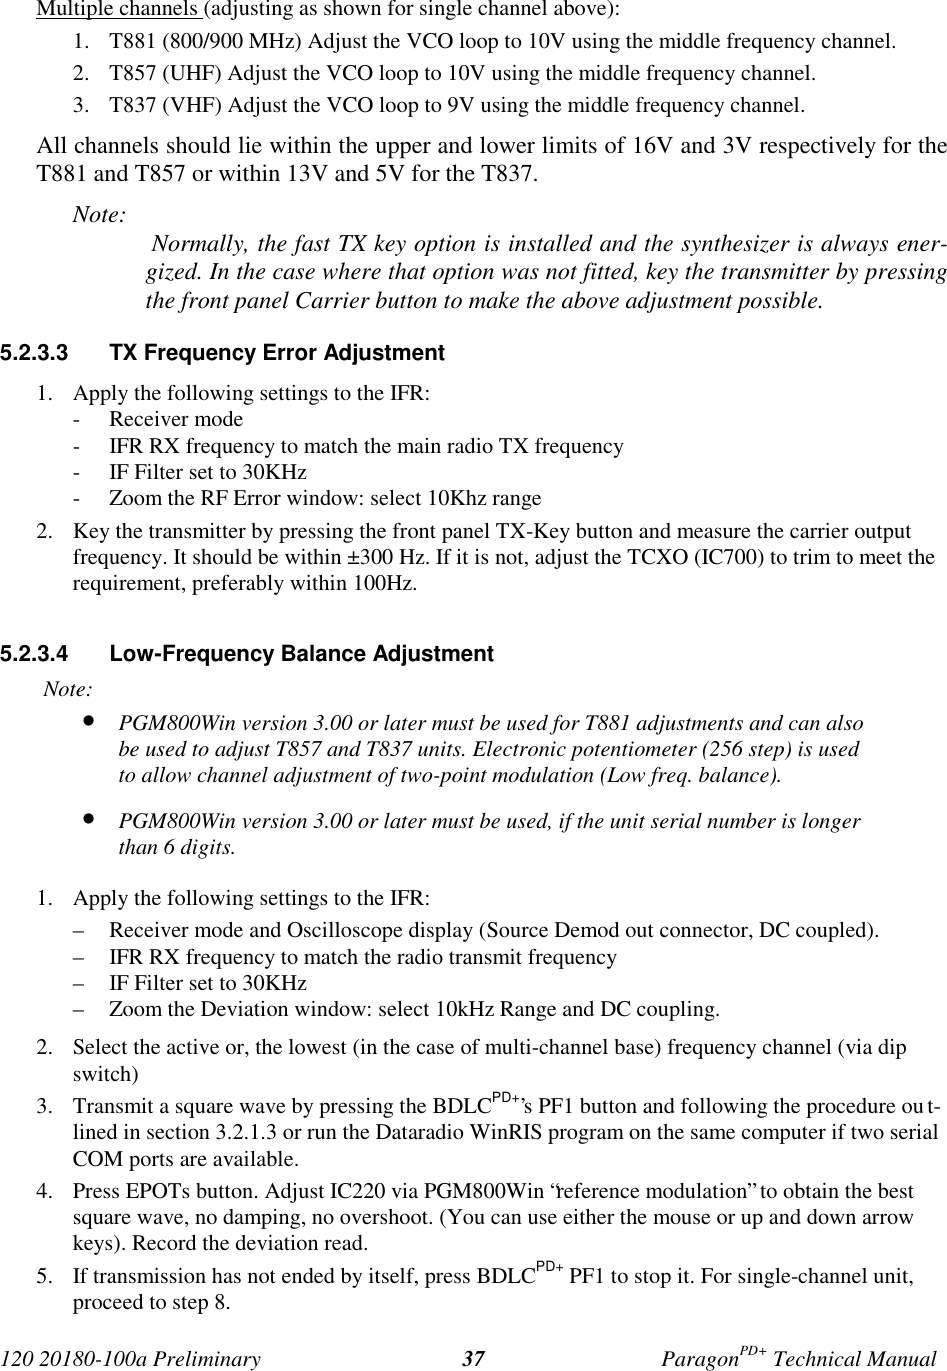 Page 44 of CalAmp Wireless Networks BDD4T85-1 Paragon/PD User Manual Parg PD  T100a Prelim